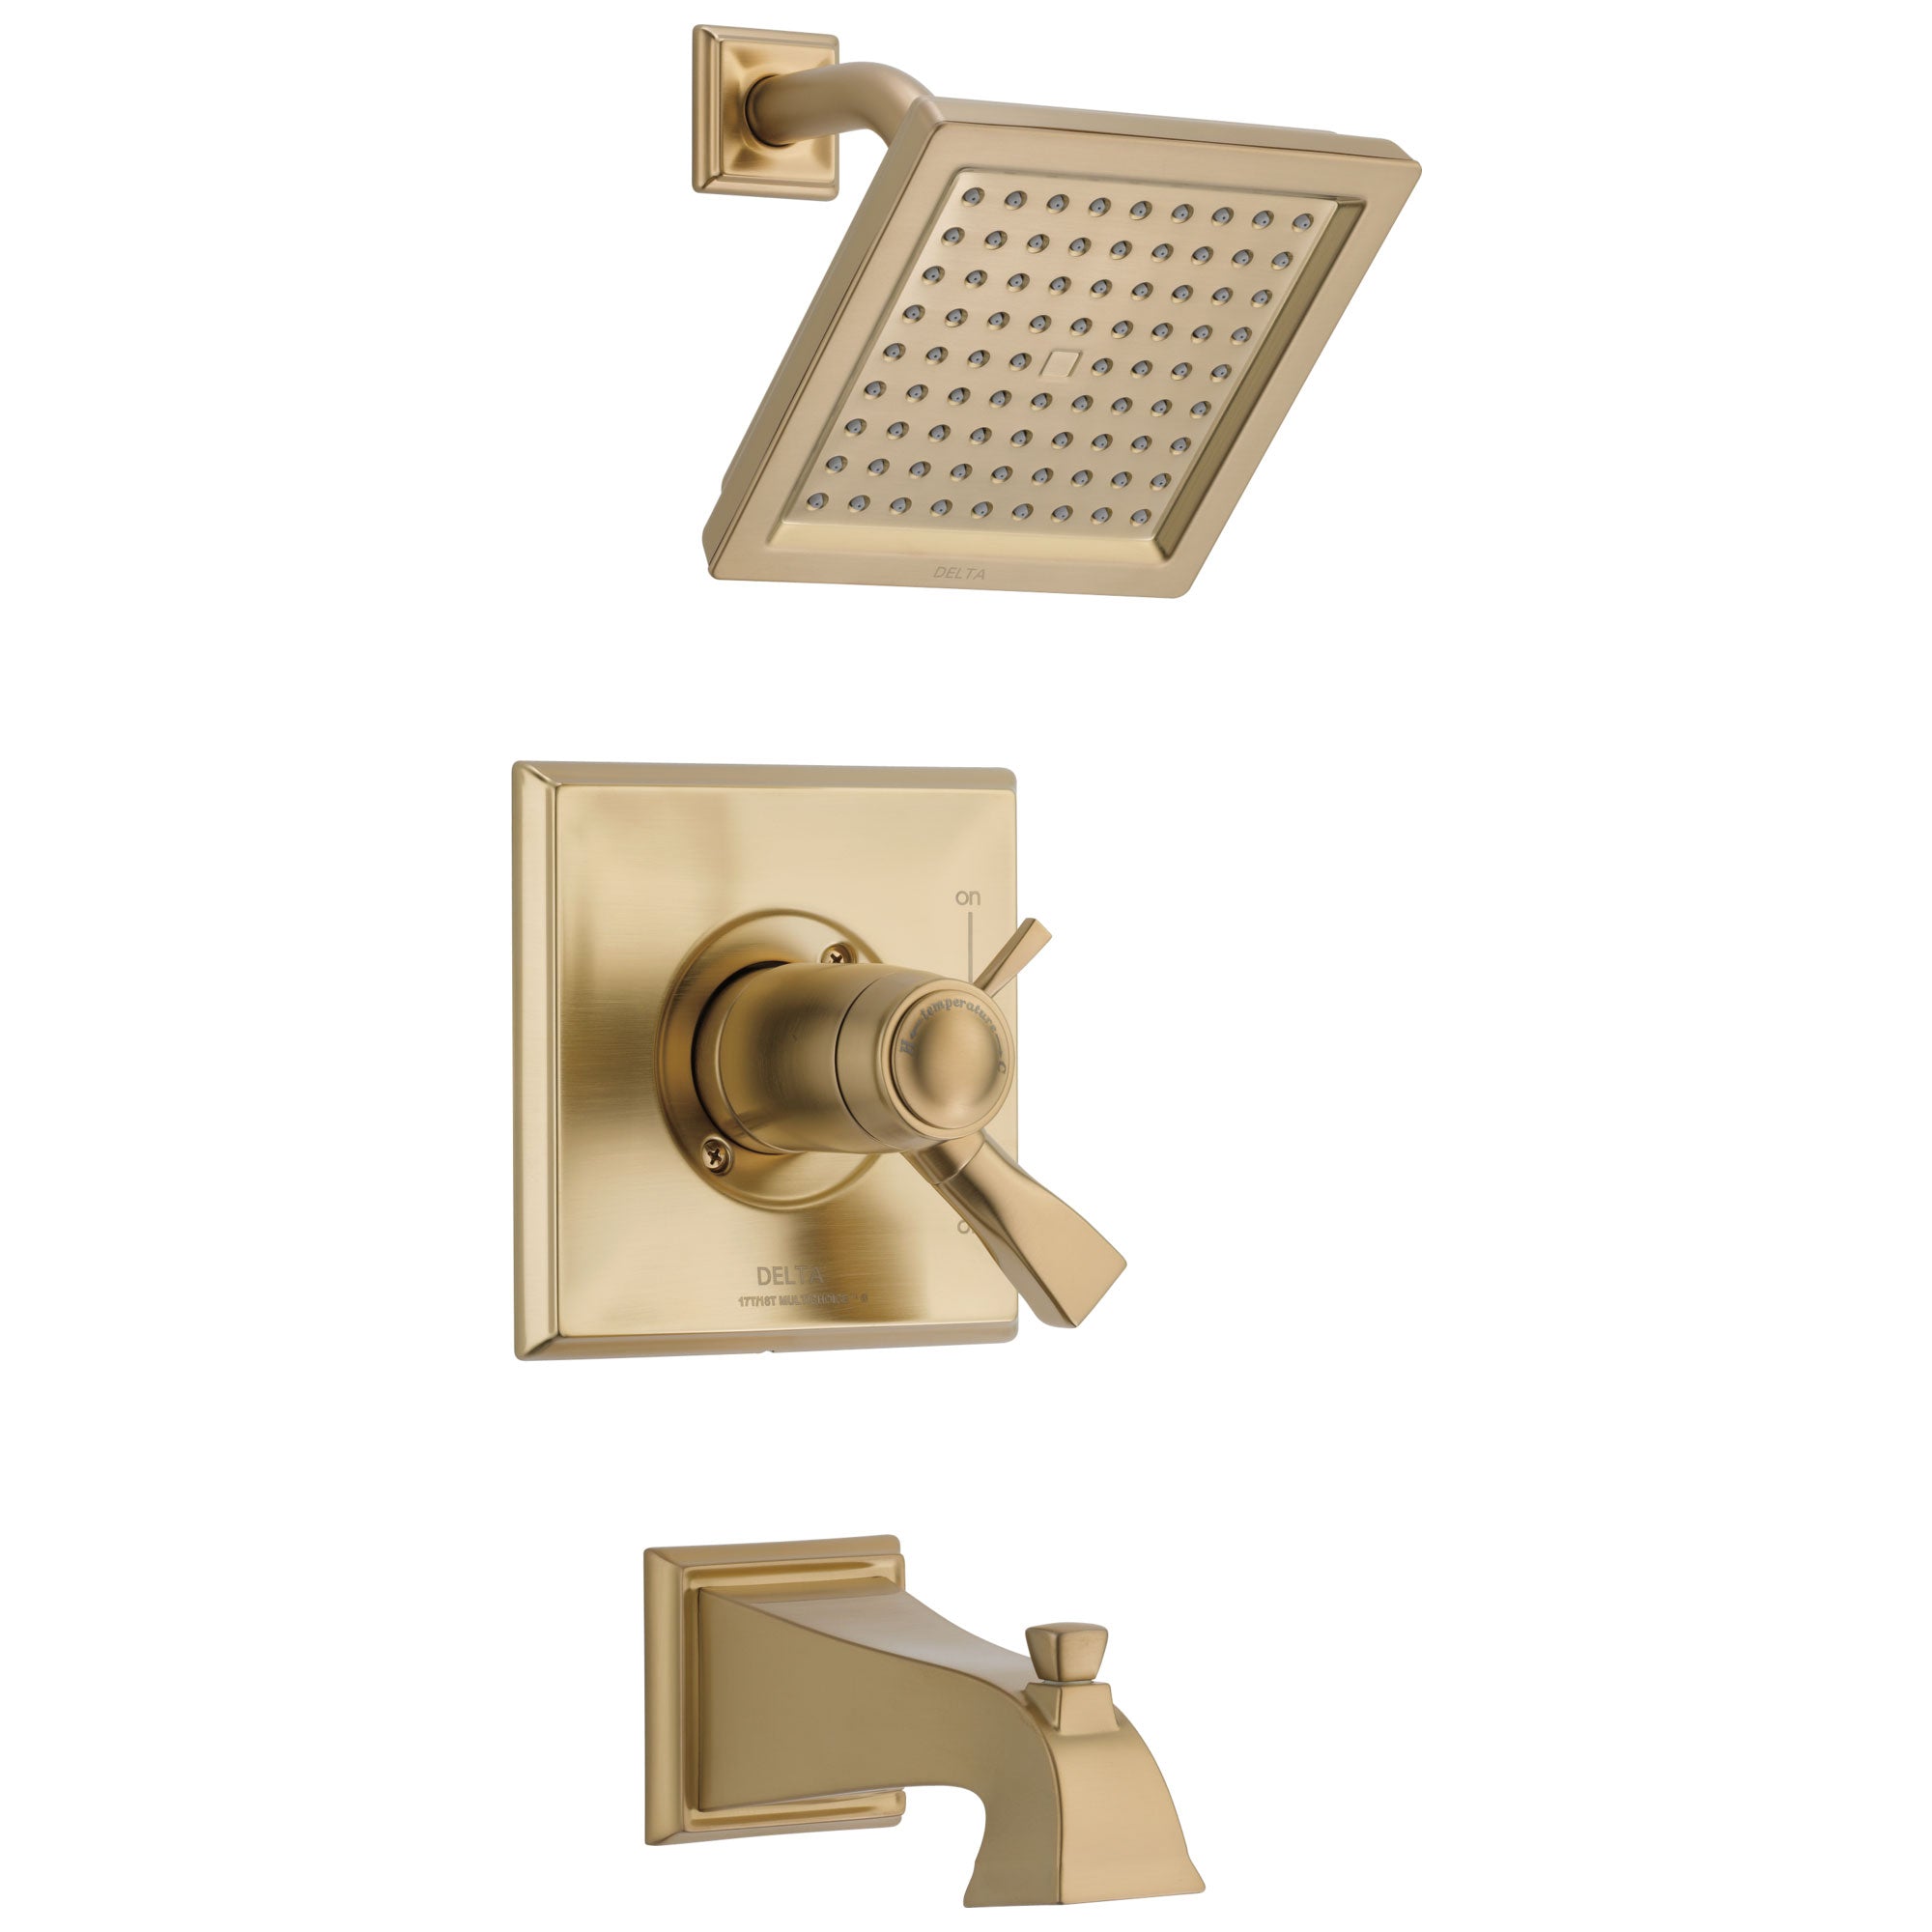 Delta Dryden Champagne Bronze Thermostatic Water Efficient Tub & Shower Faucet Combo Includes Handles, Cartridge, and Valve with Stops D3252V